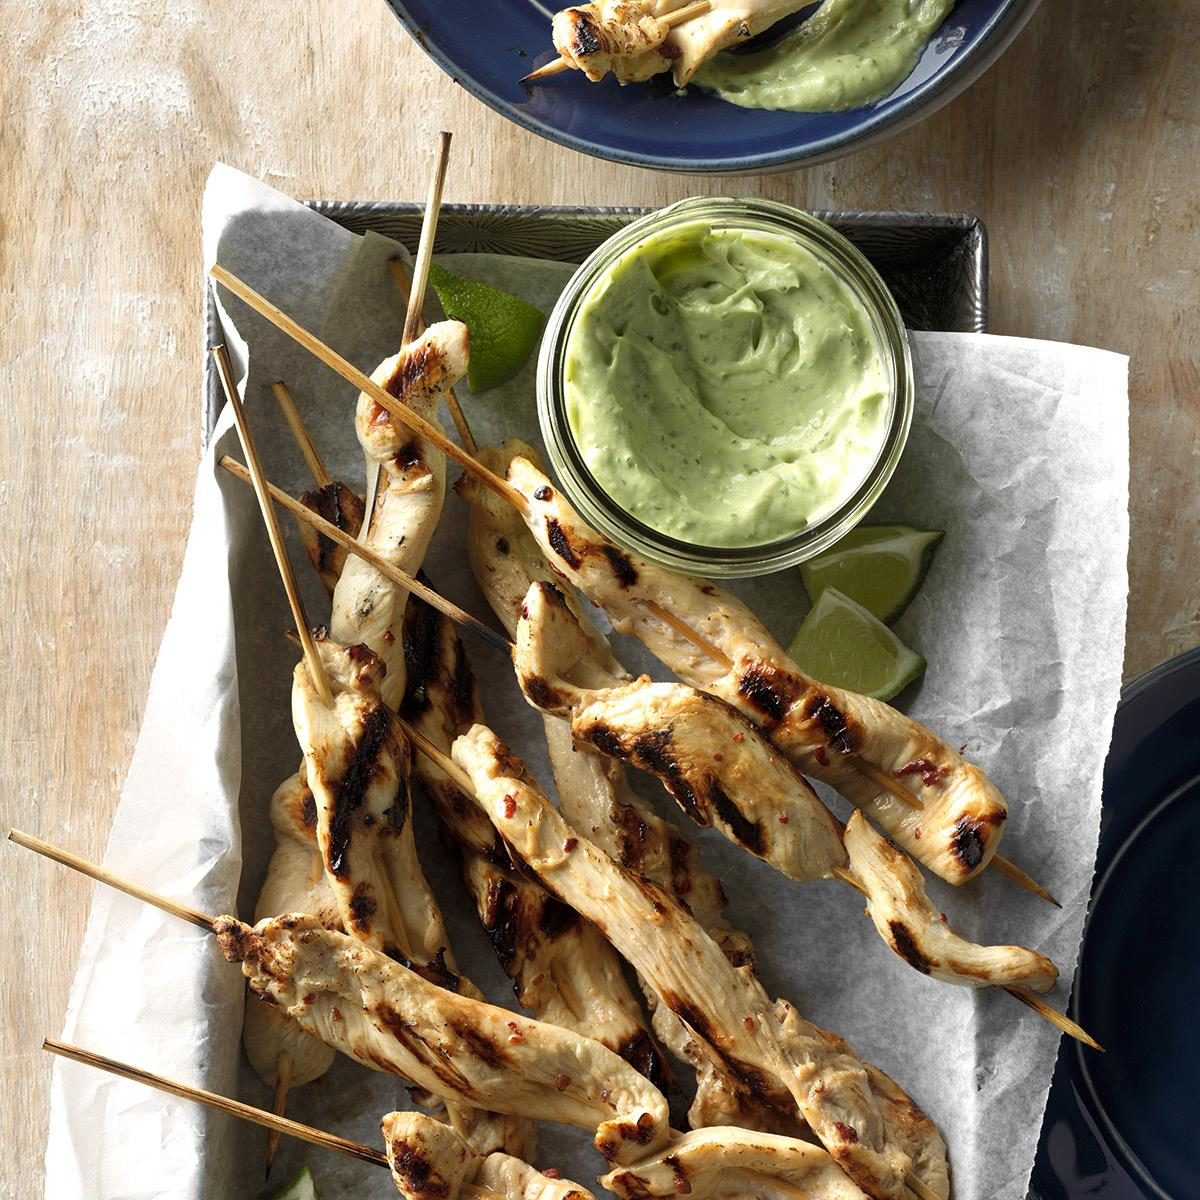 Chicken Skewers With Cool Avocado Sauce Exps Dsbz17 37502 C01 13 4b 3